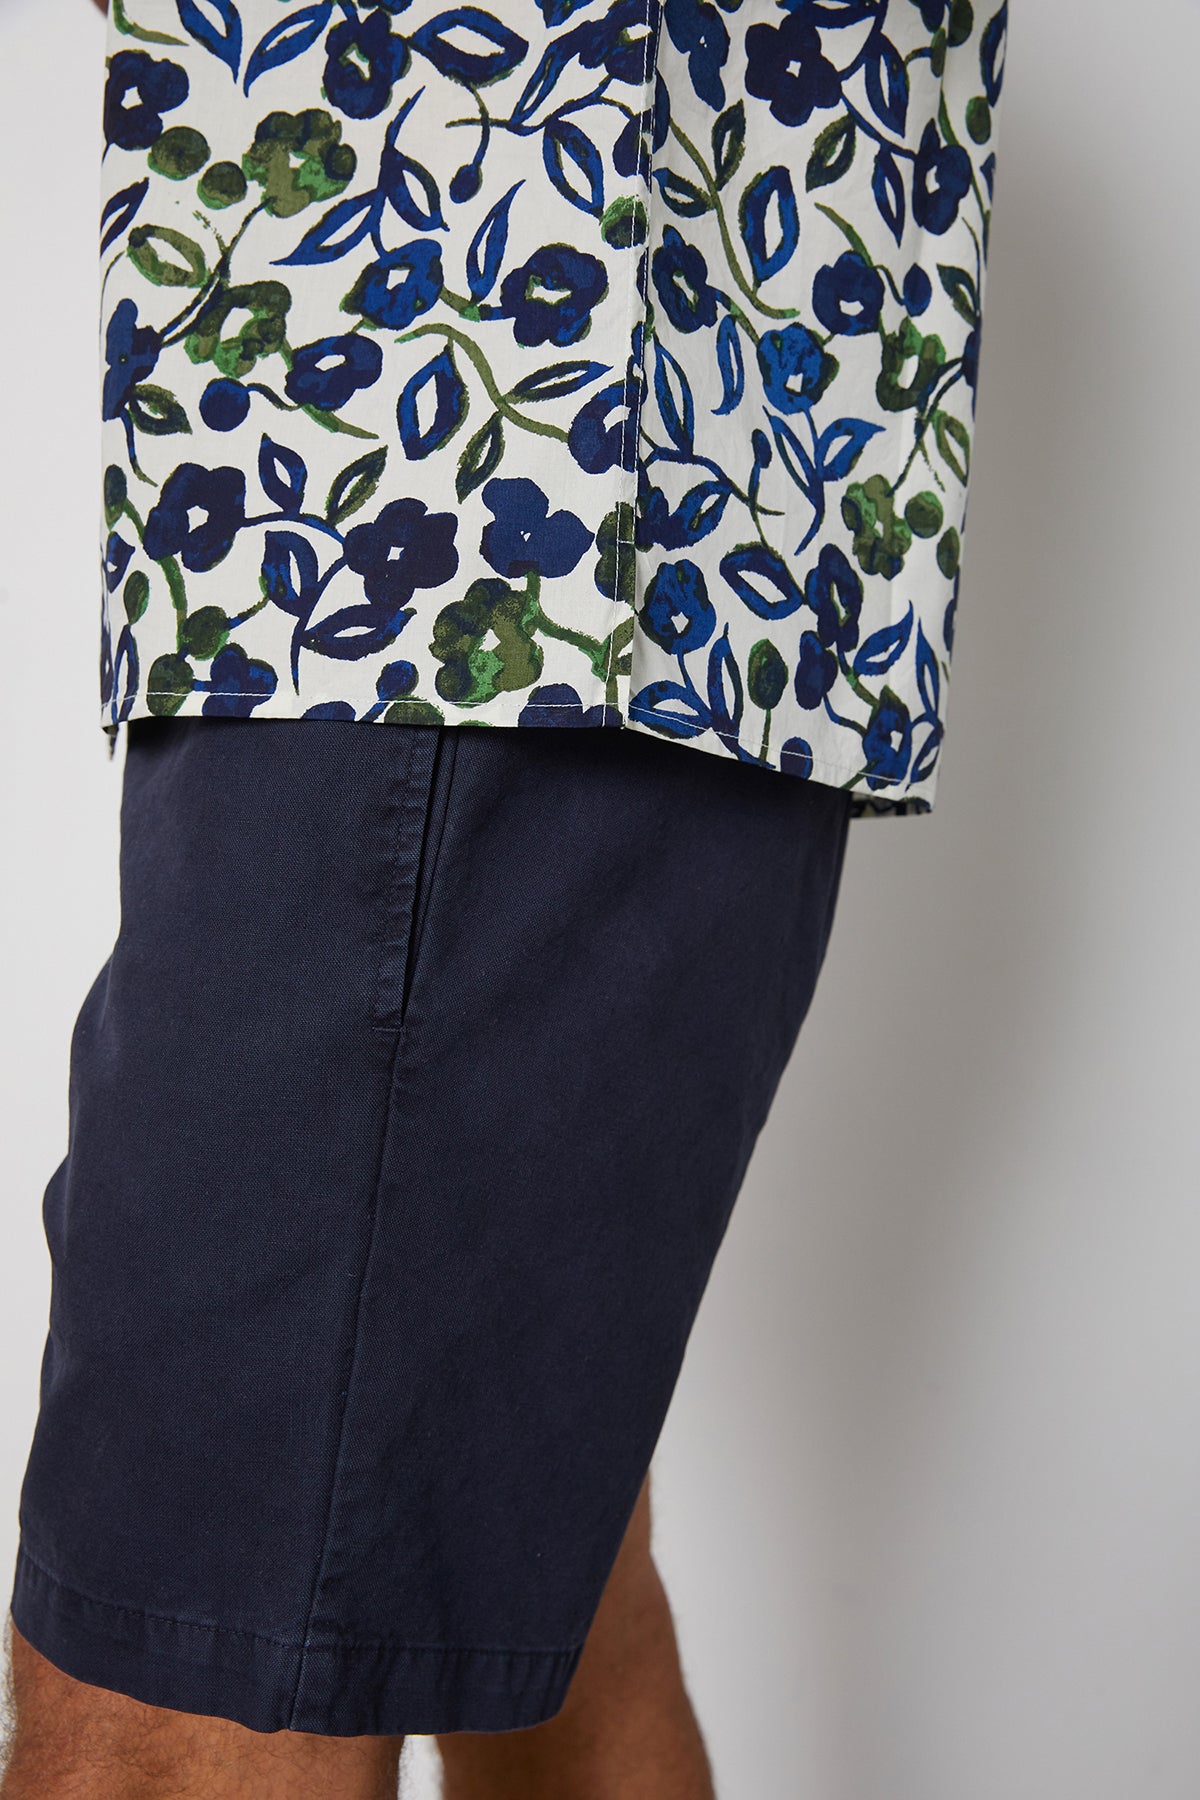 Side hem detail of Isaiah button up printed shirt with navy and green flourishes.-24605766320321